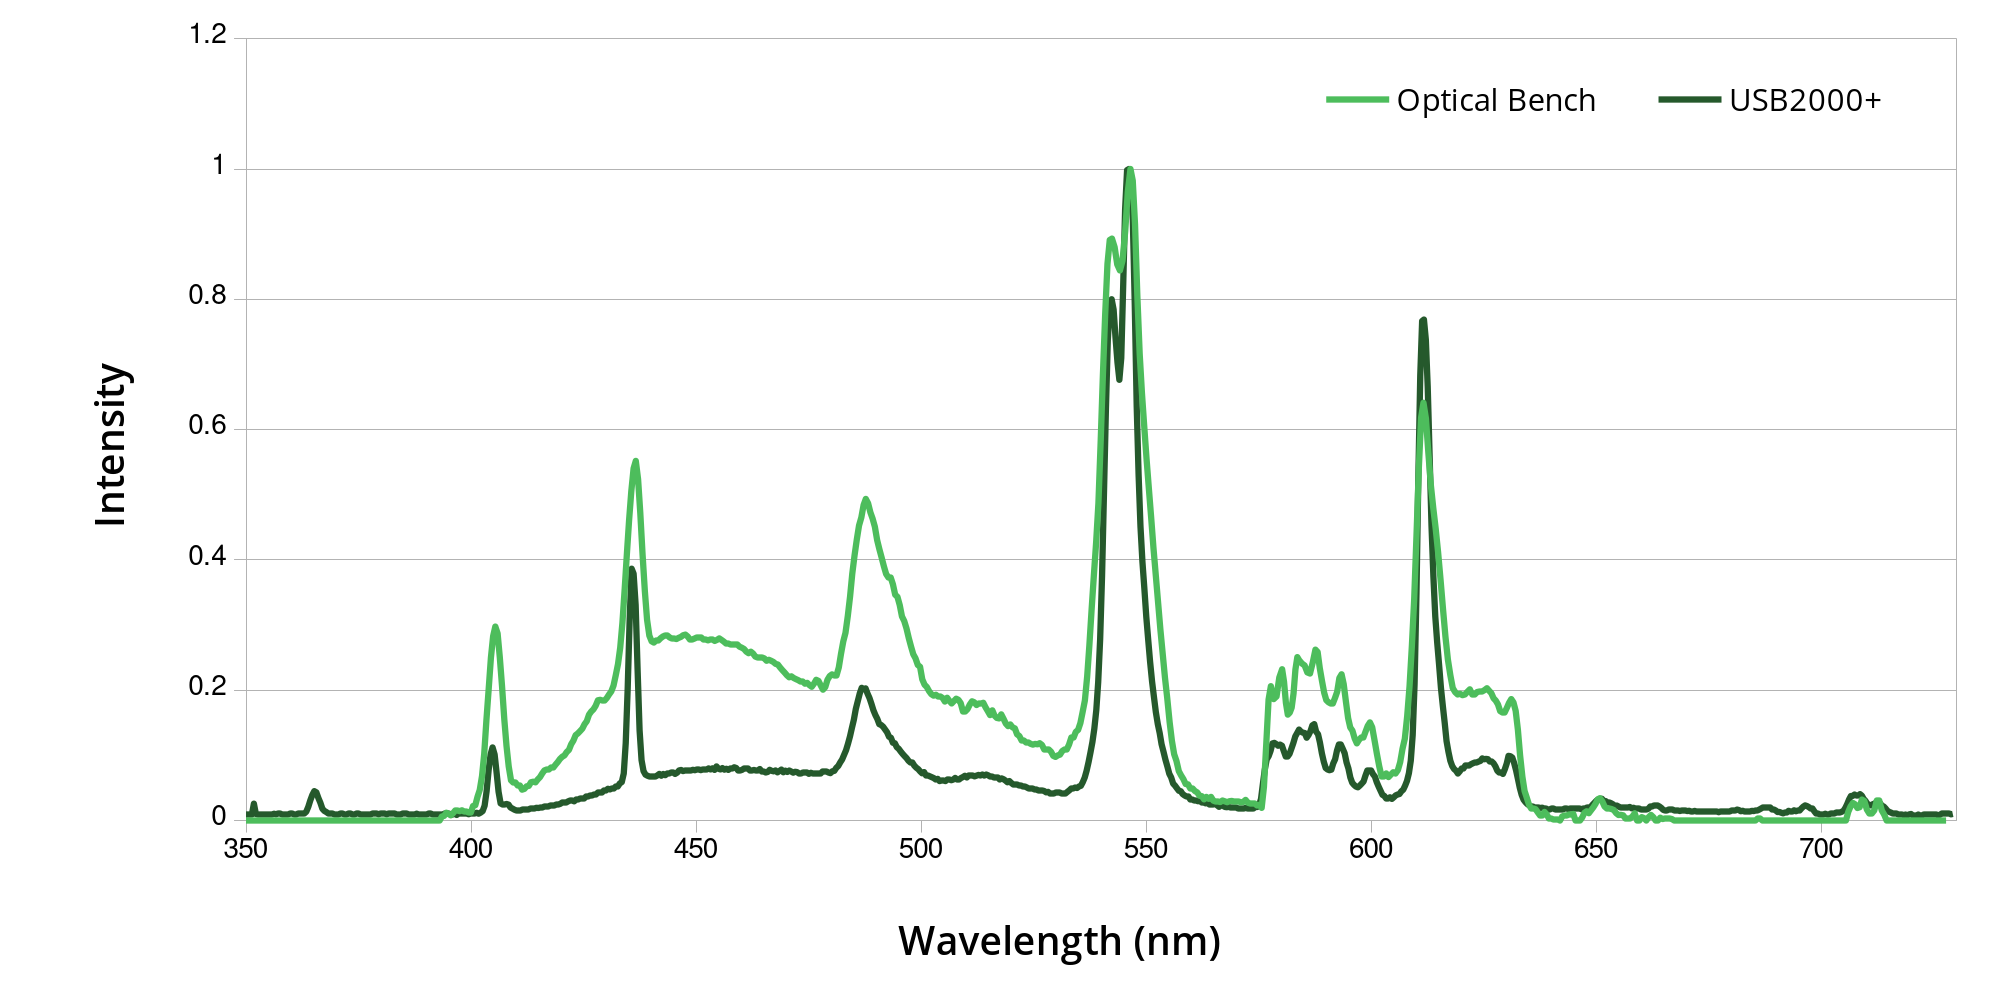 Graph of two fluorescent lamp spectra - one is a little less 'spiky' than the other but they're similar